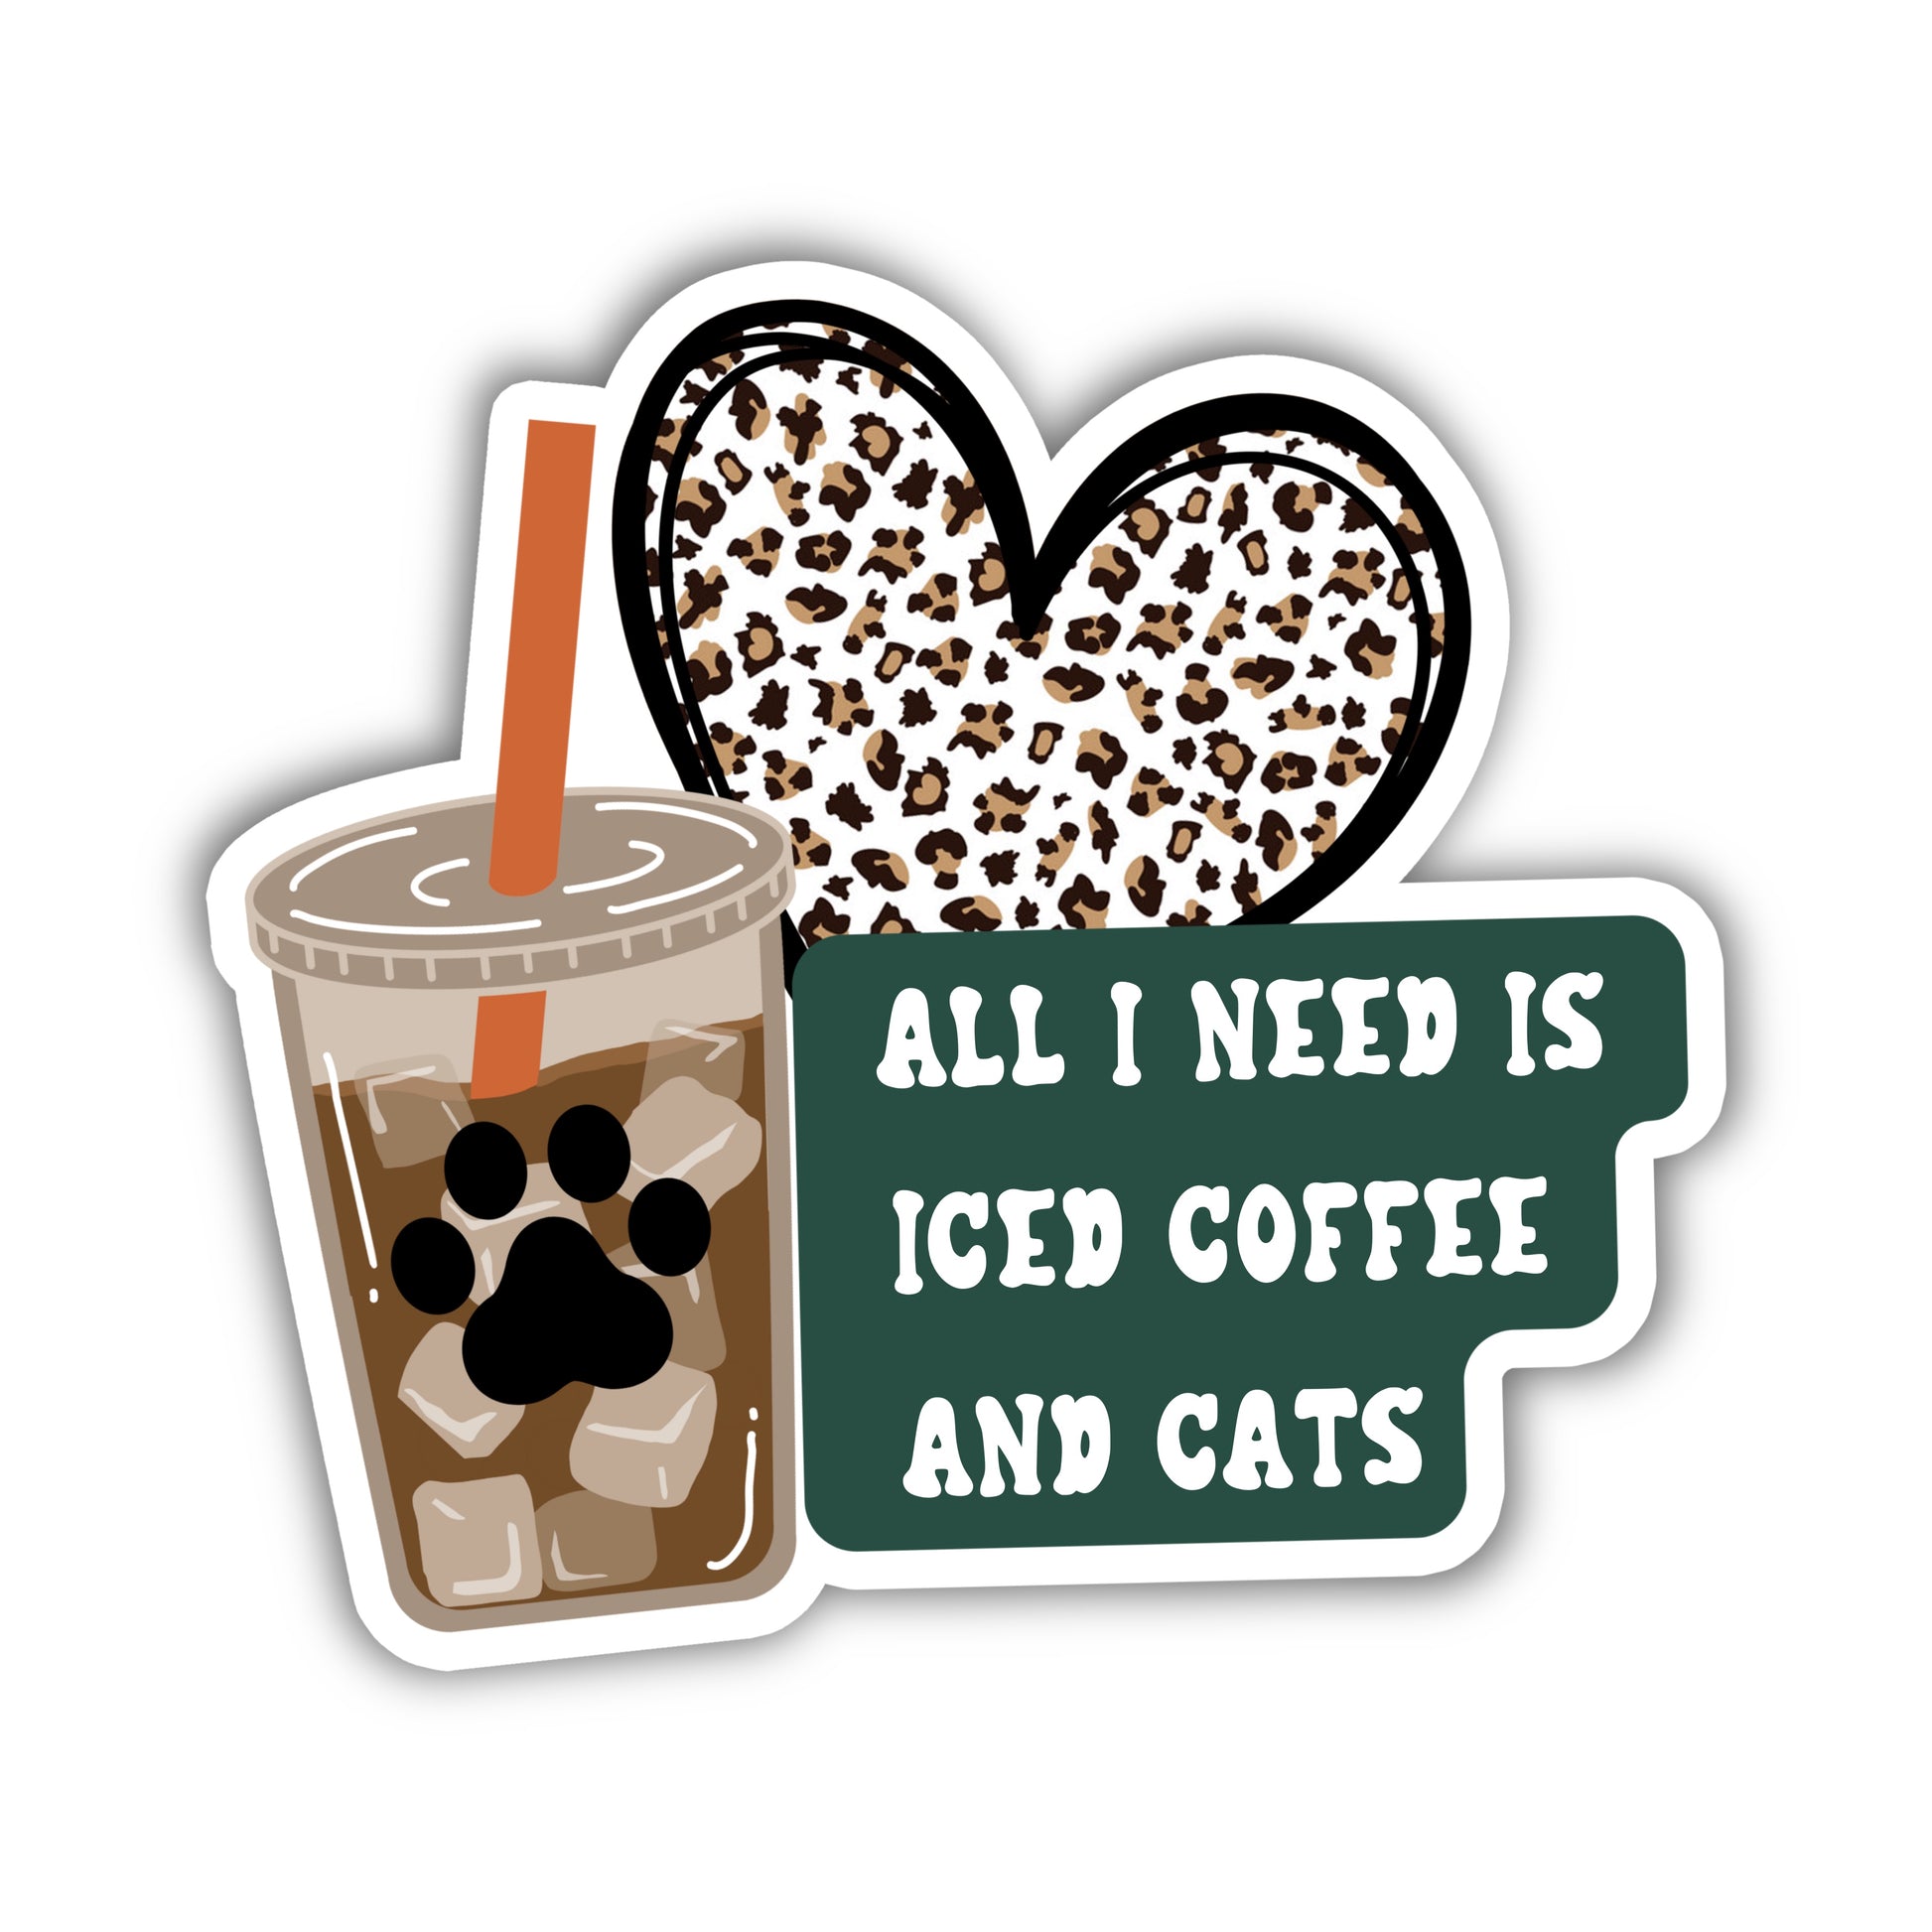 ICED COFFEE AND CATS - Foster Mom Things